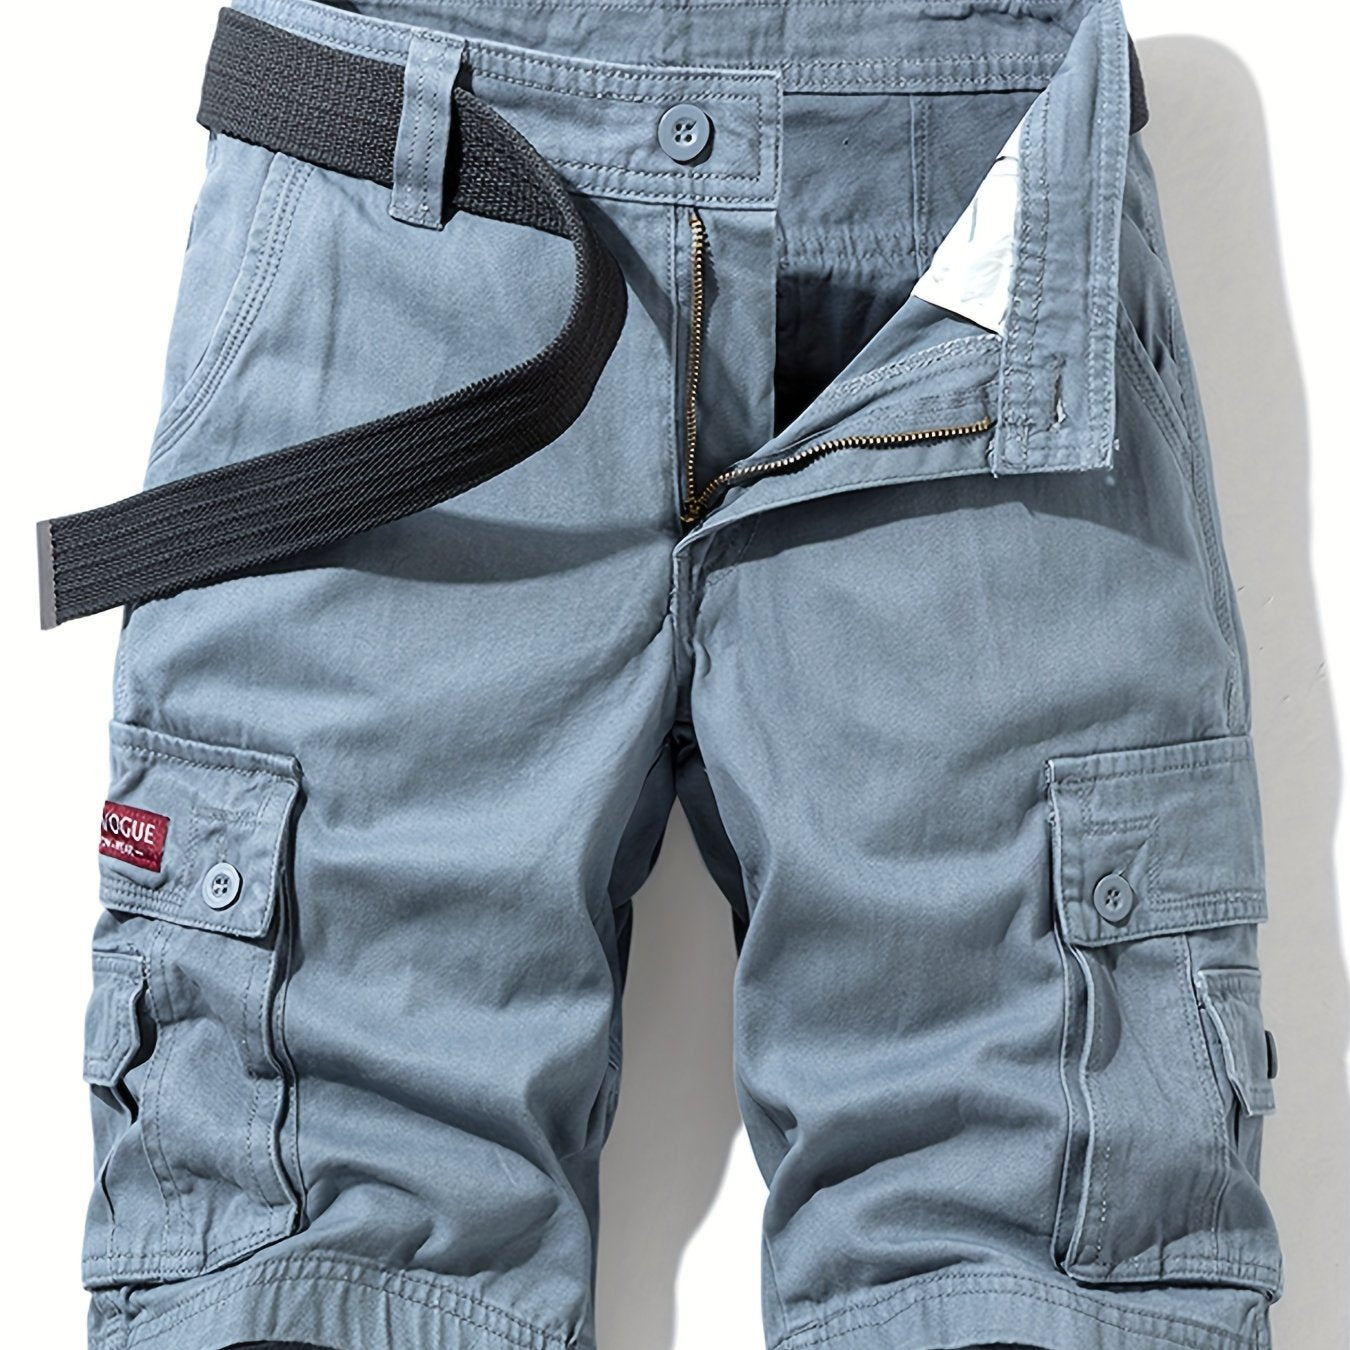 「lovevop」Spring And Summer, Men's Cargo Shorts, Pure Cotton, Casual Beach Pants, Breathable And Multipockets Without Belt